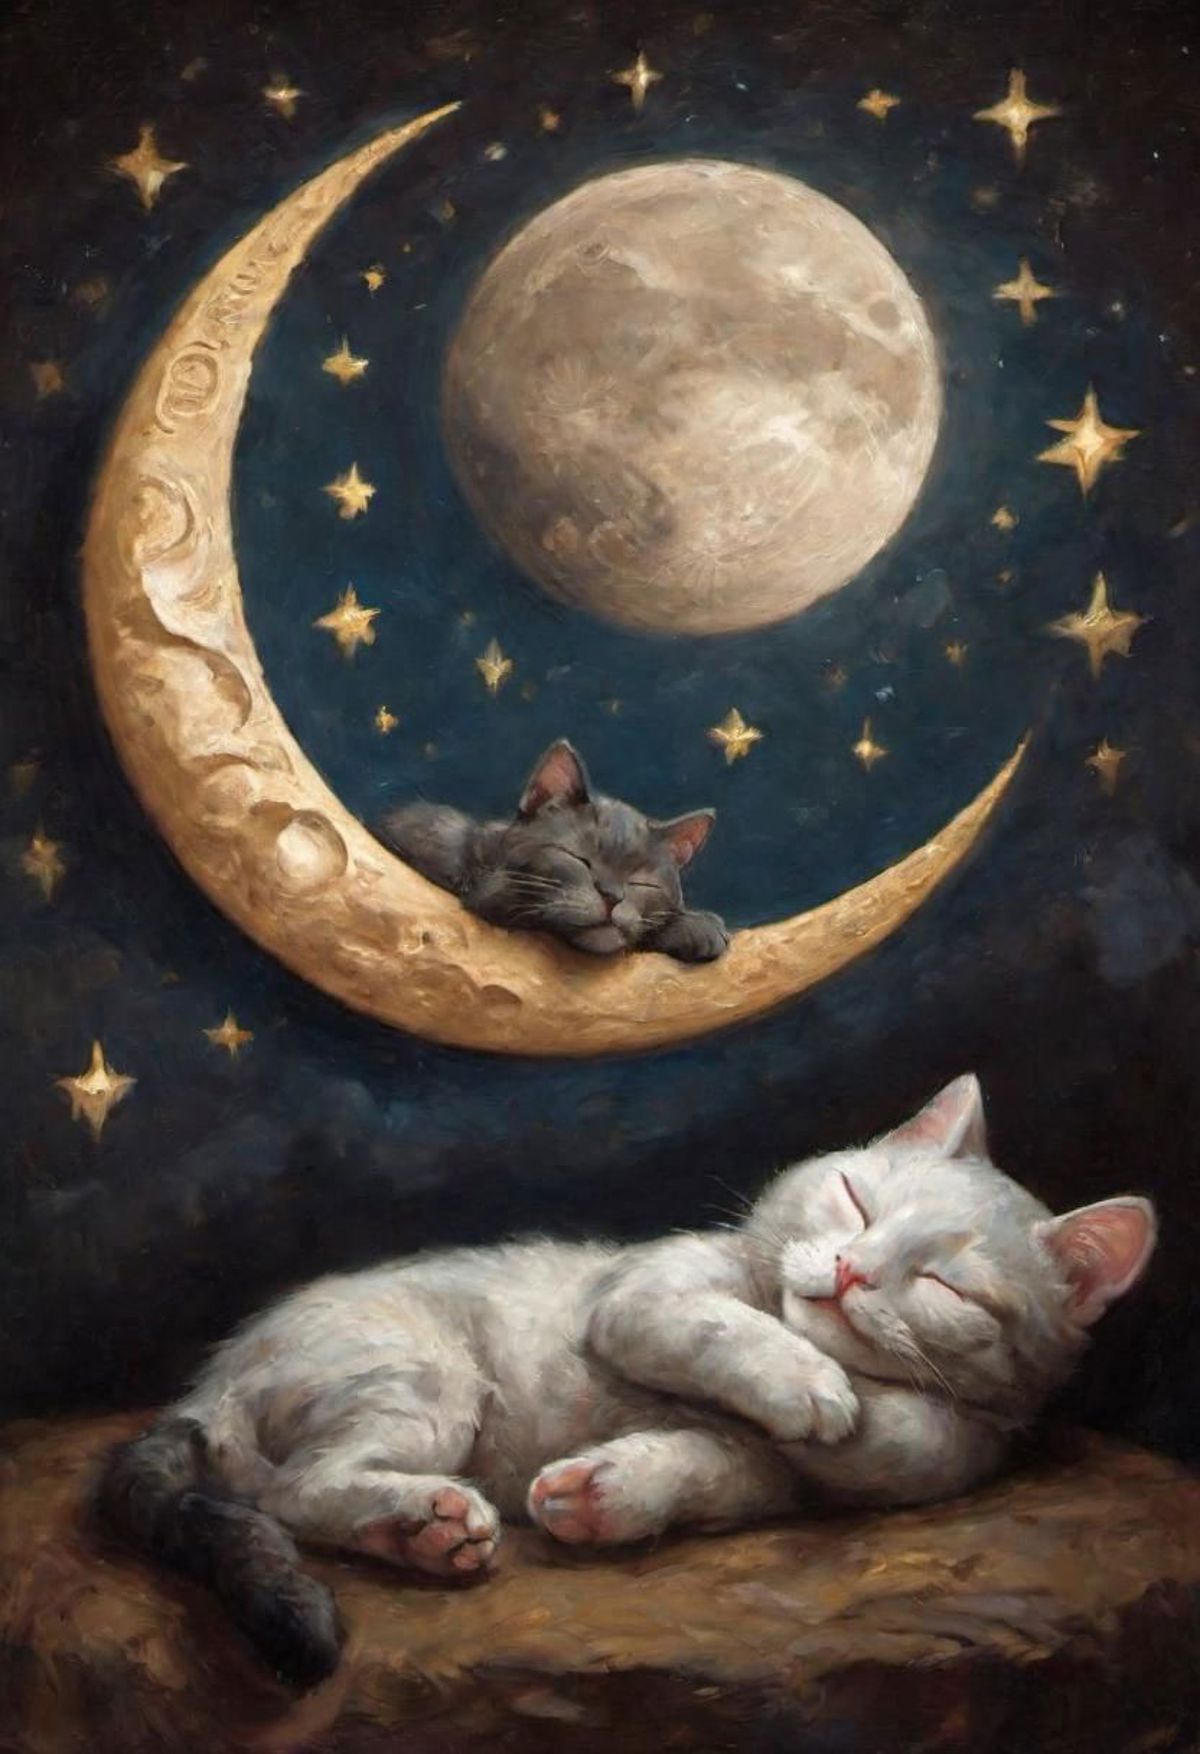 Painting of two cats sleeping on the moon.